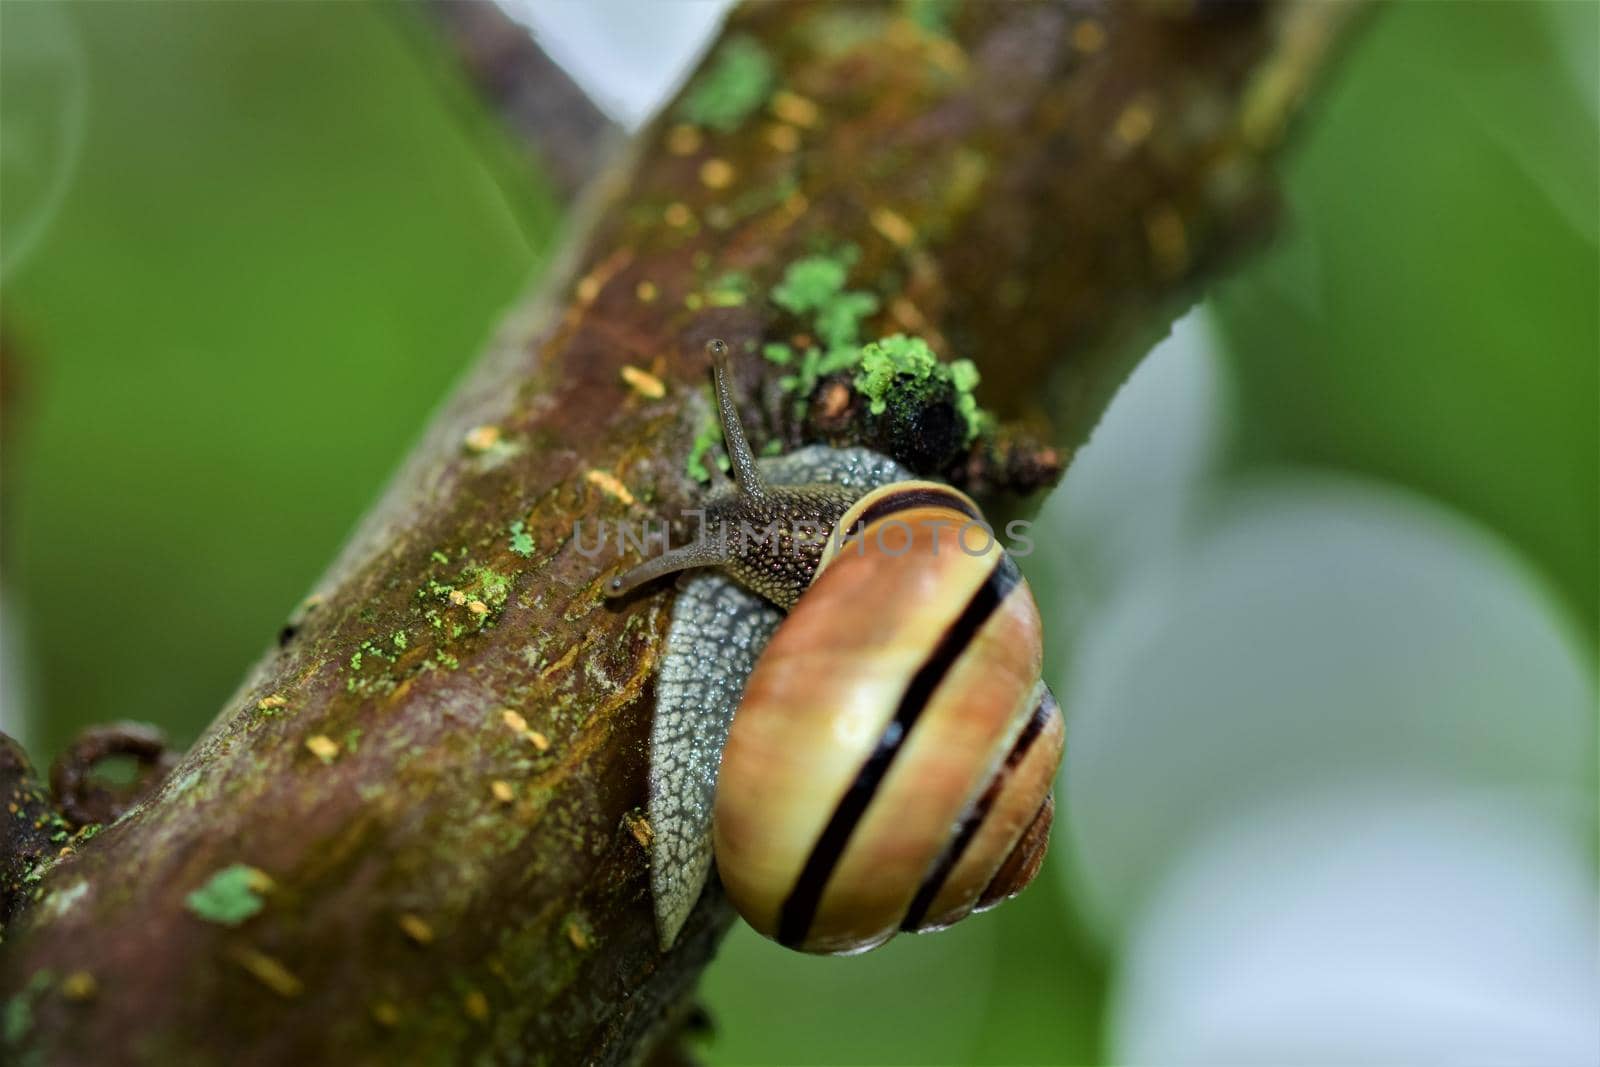 Close-up of a housing snail on a brown tree branch against agreen blurred background